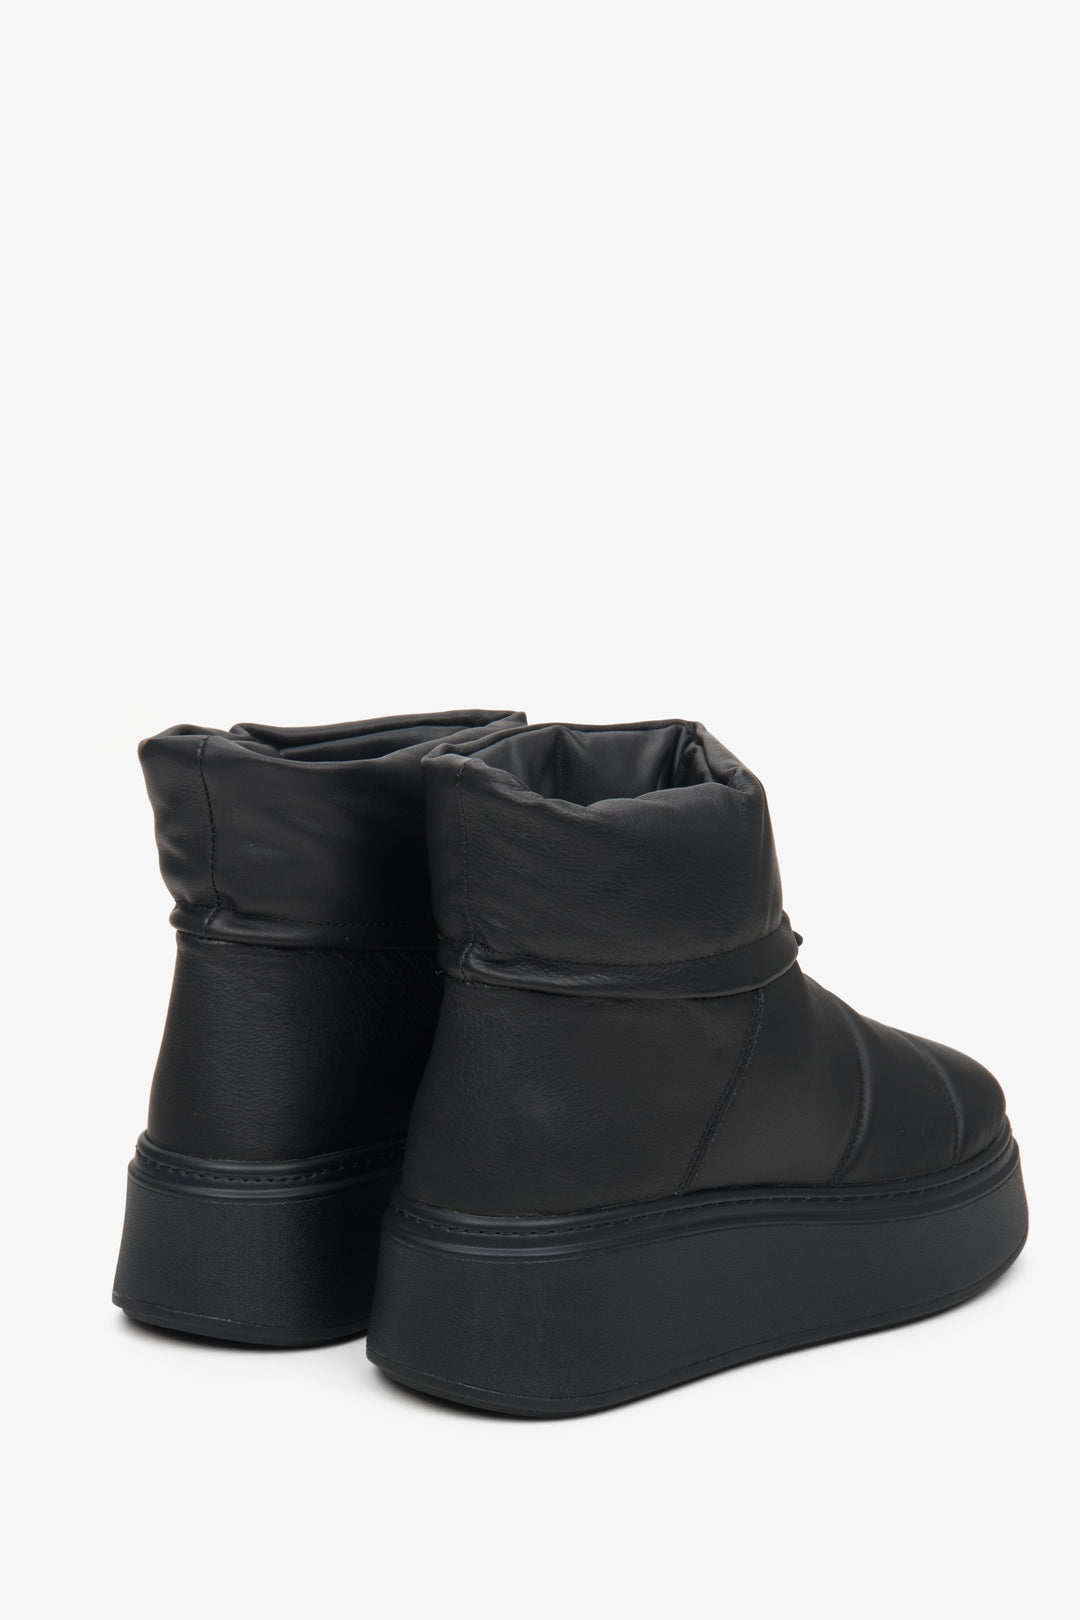 Estro women's black leather snow boots - presentation of the heel and side seam.